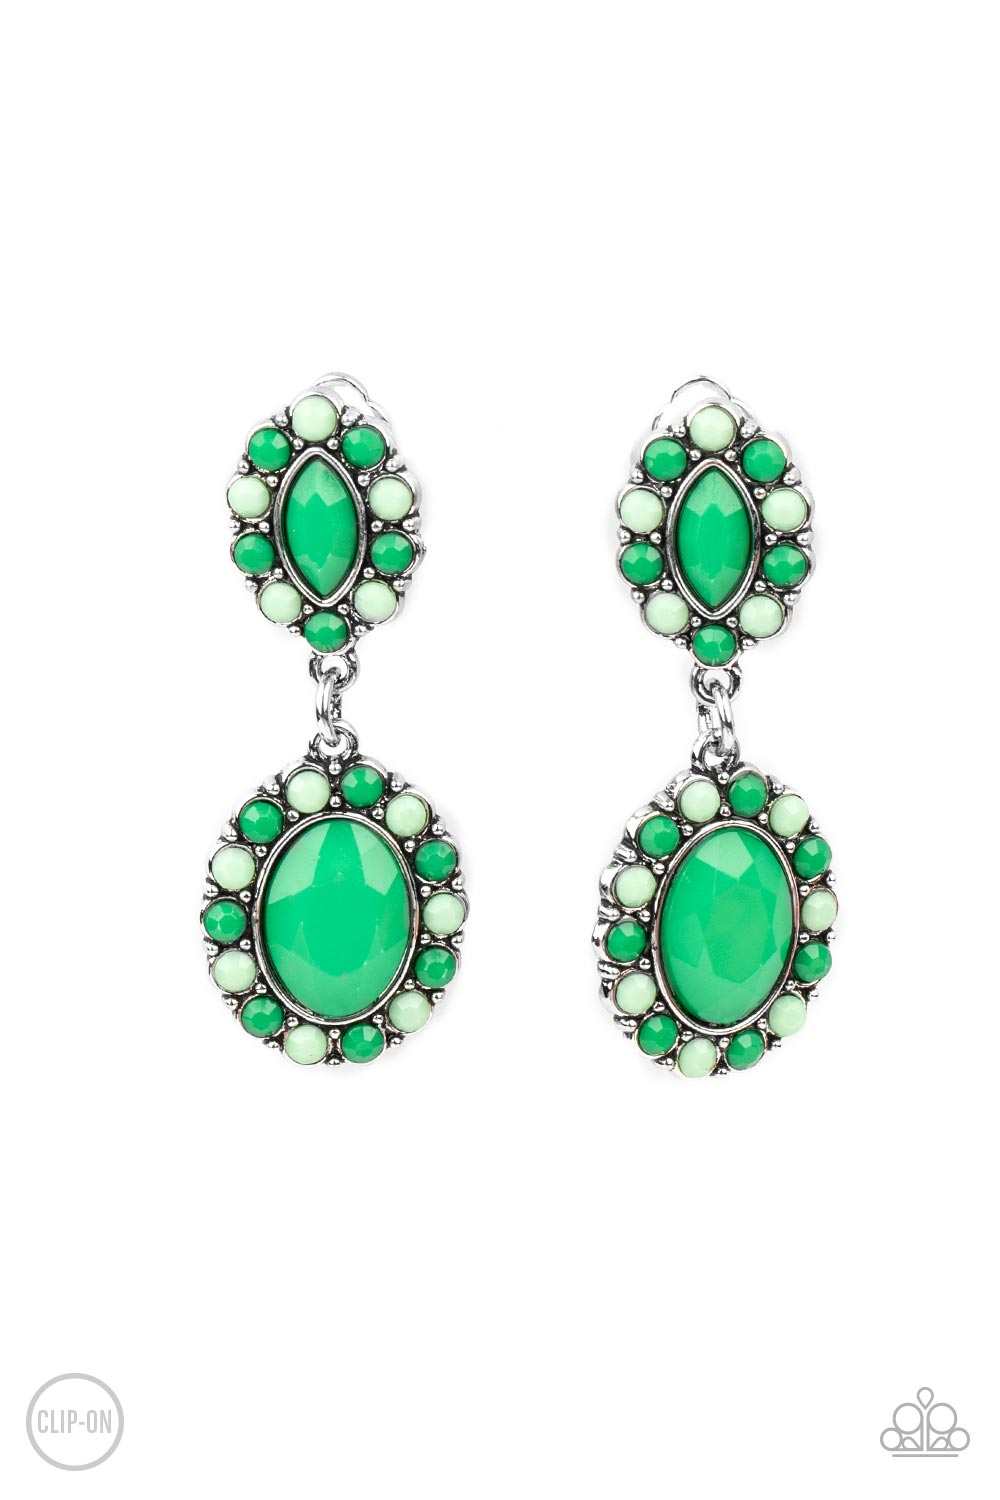 Paparazzi Earrings ~ Positively Pampered - Green Clip-On Earring